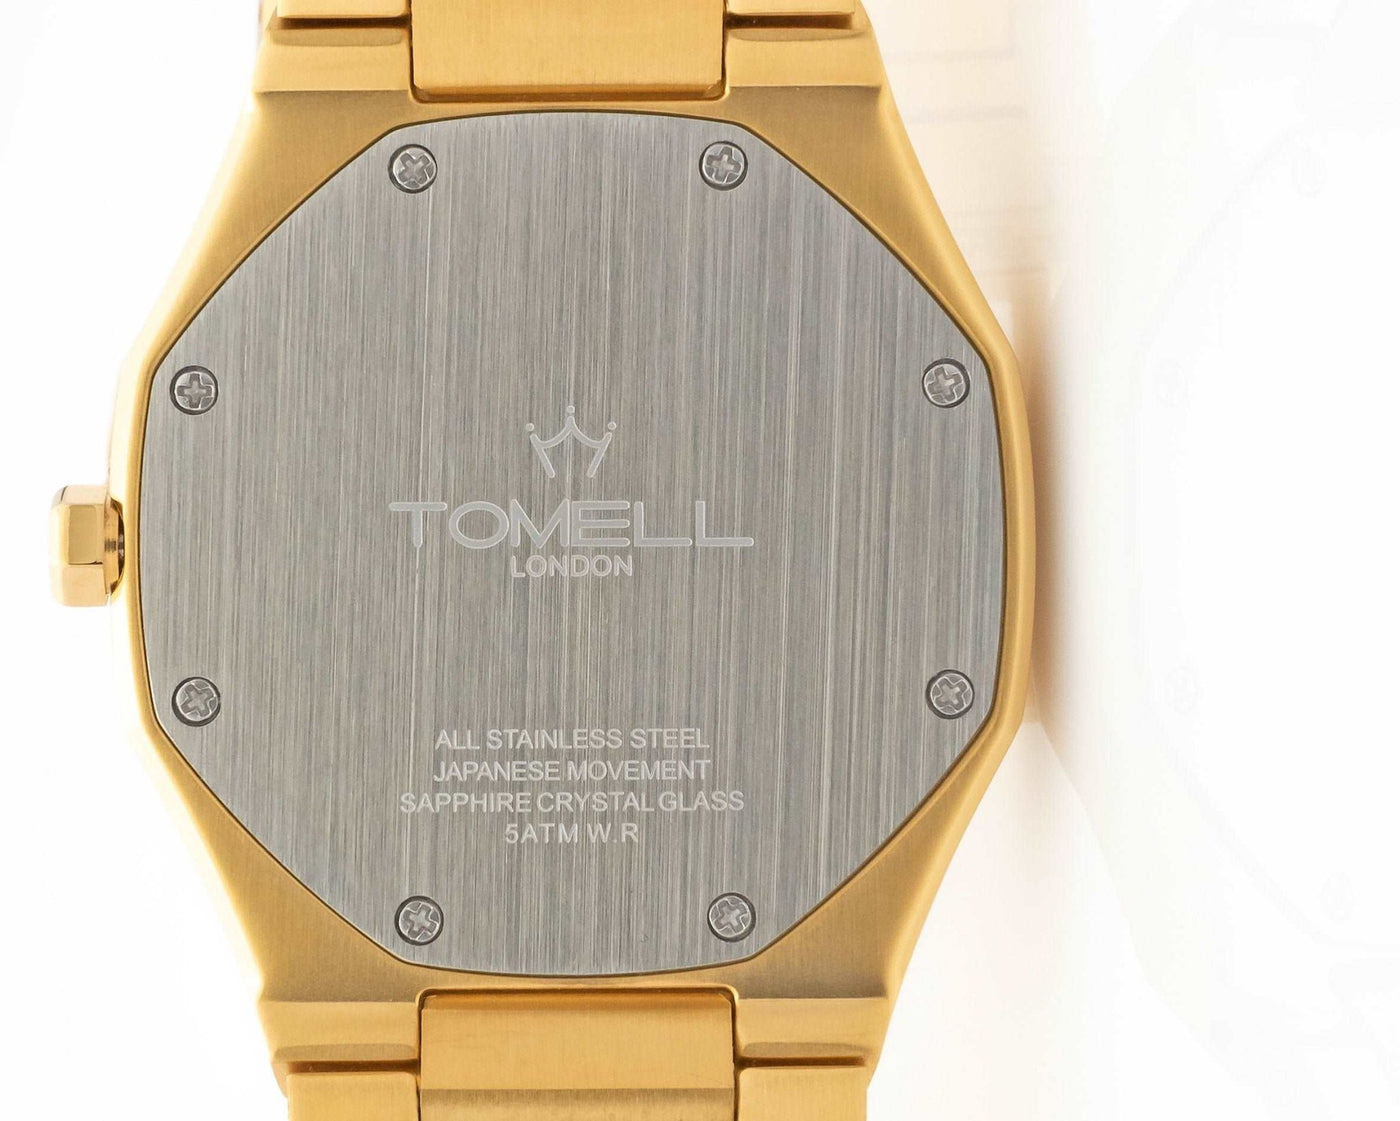 VERUSSI | GOLD - Tomell London